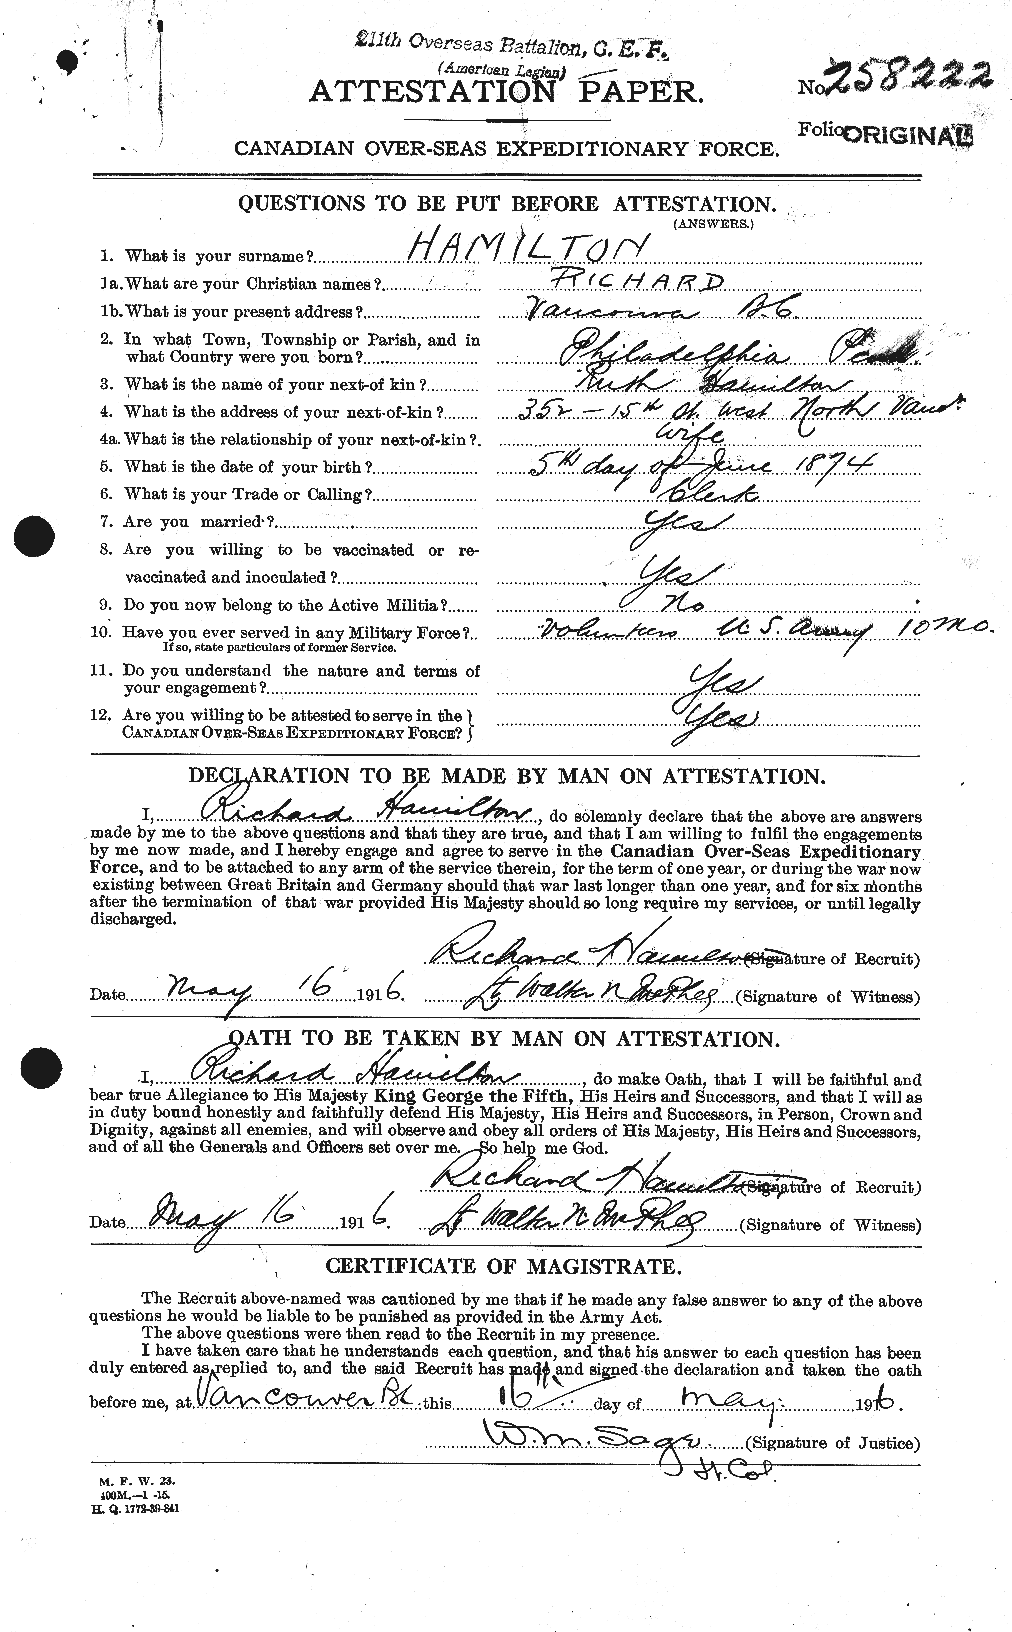 Personnel Records of the First World War - CEF 373215a